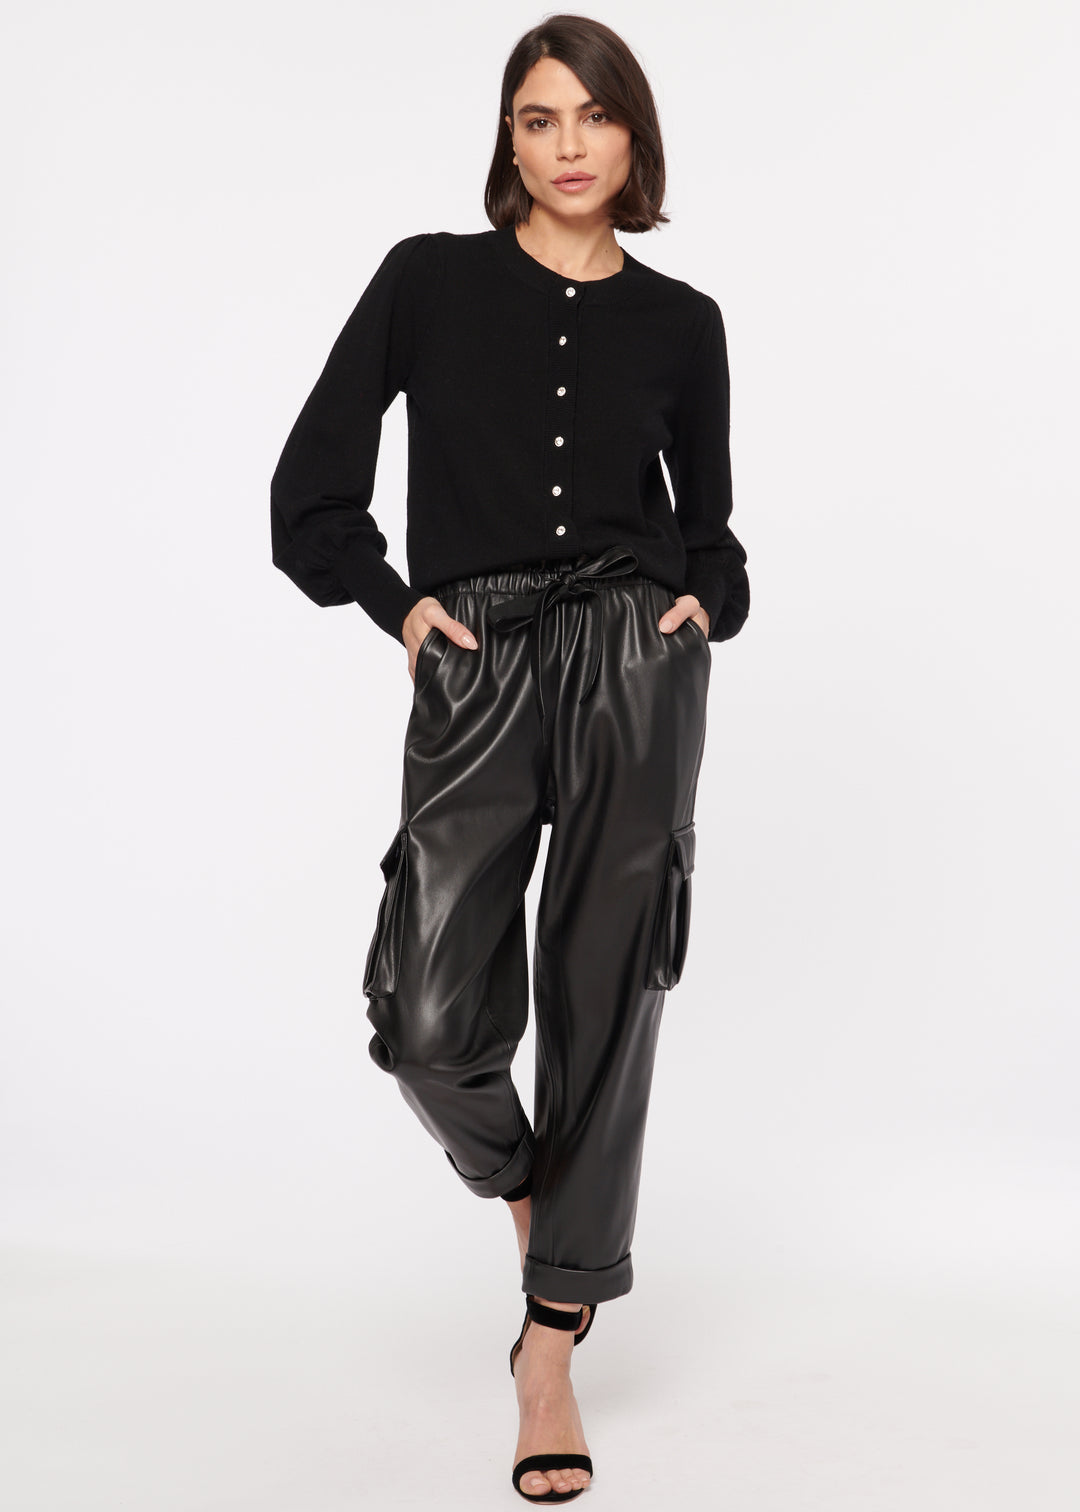 Cami NYC - Addy Vegan Leather Pant in Black